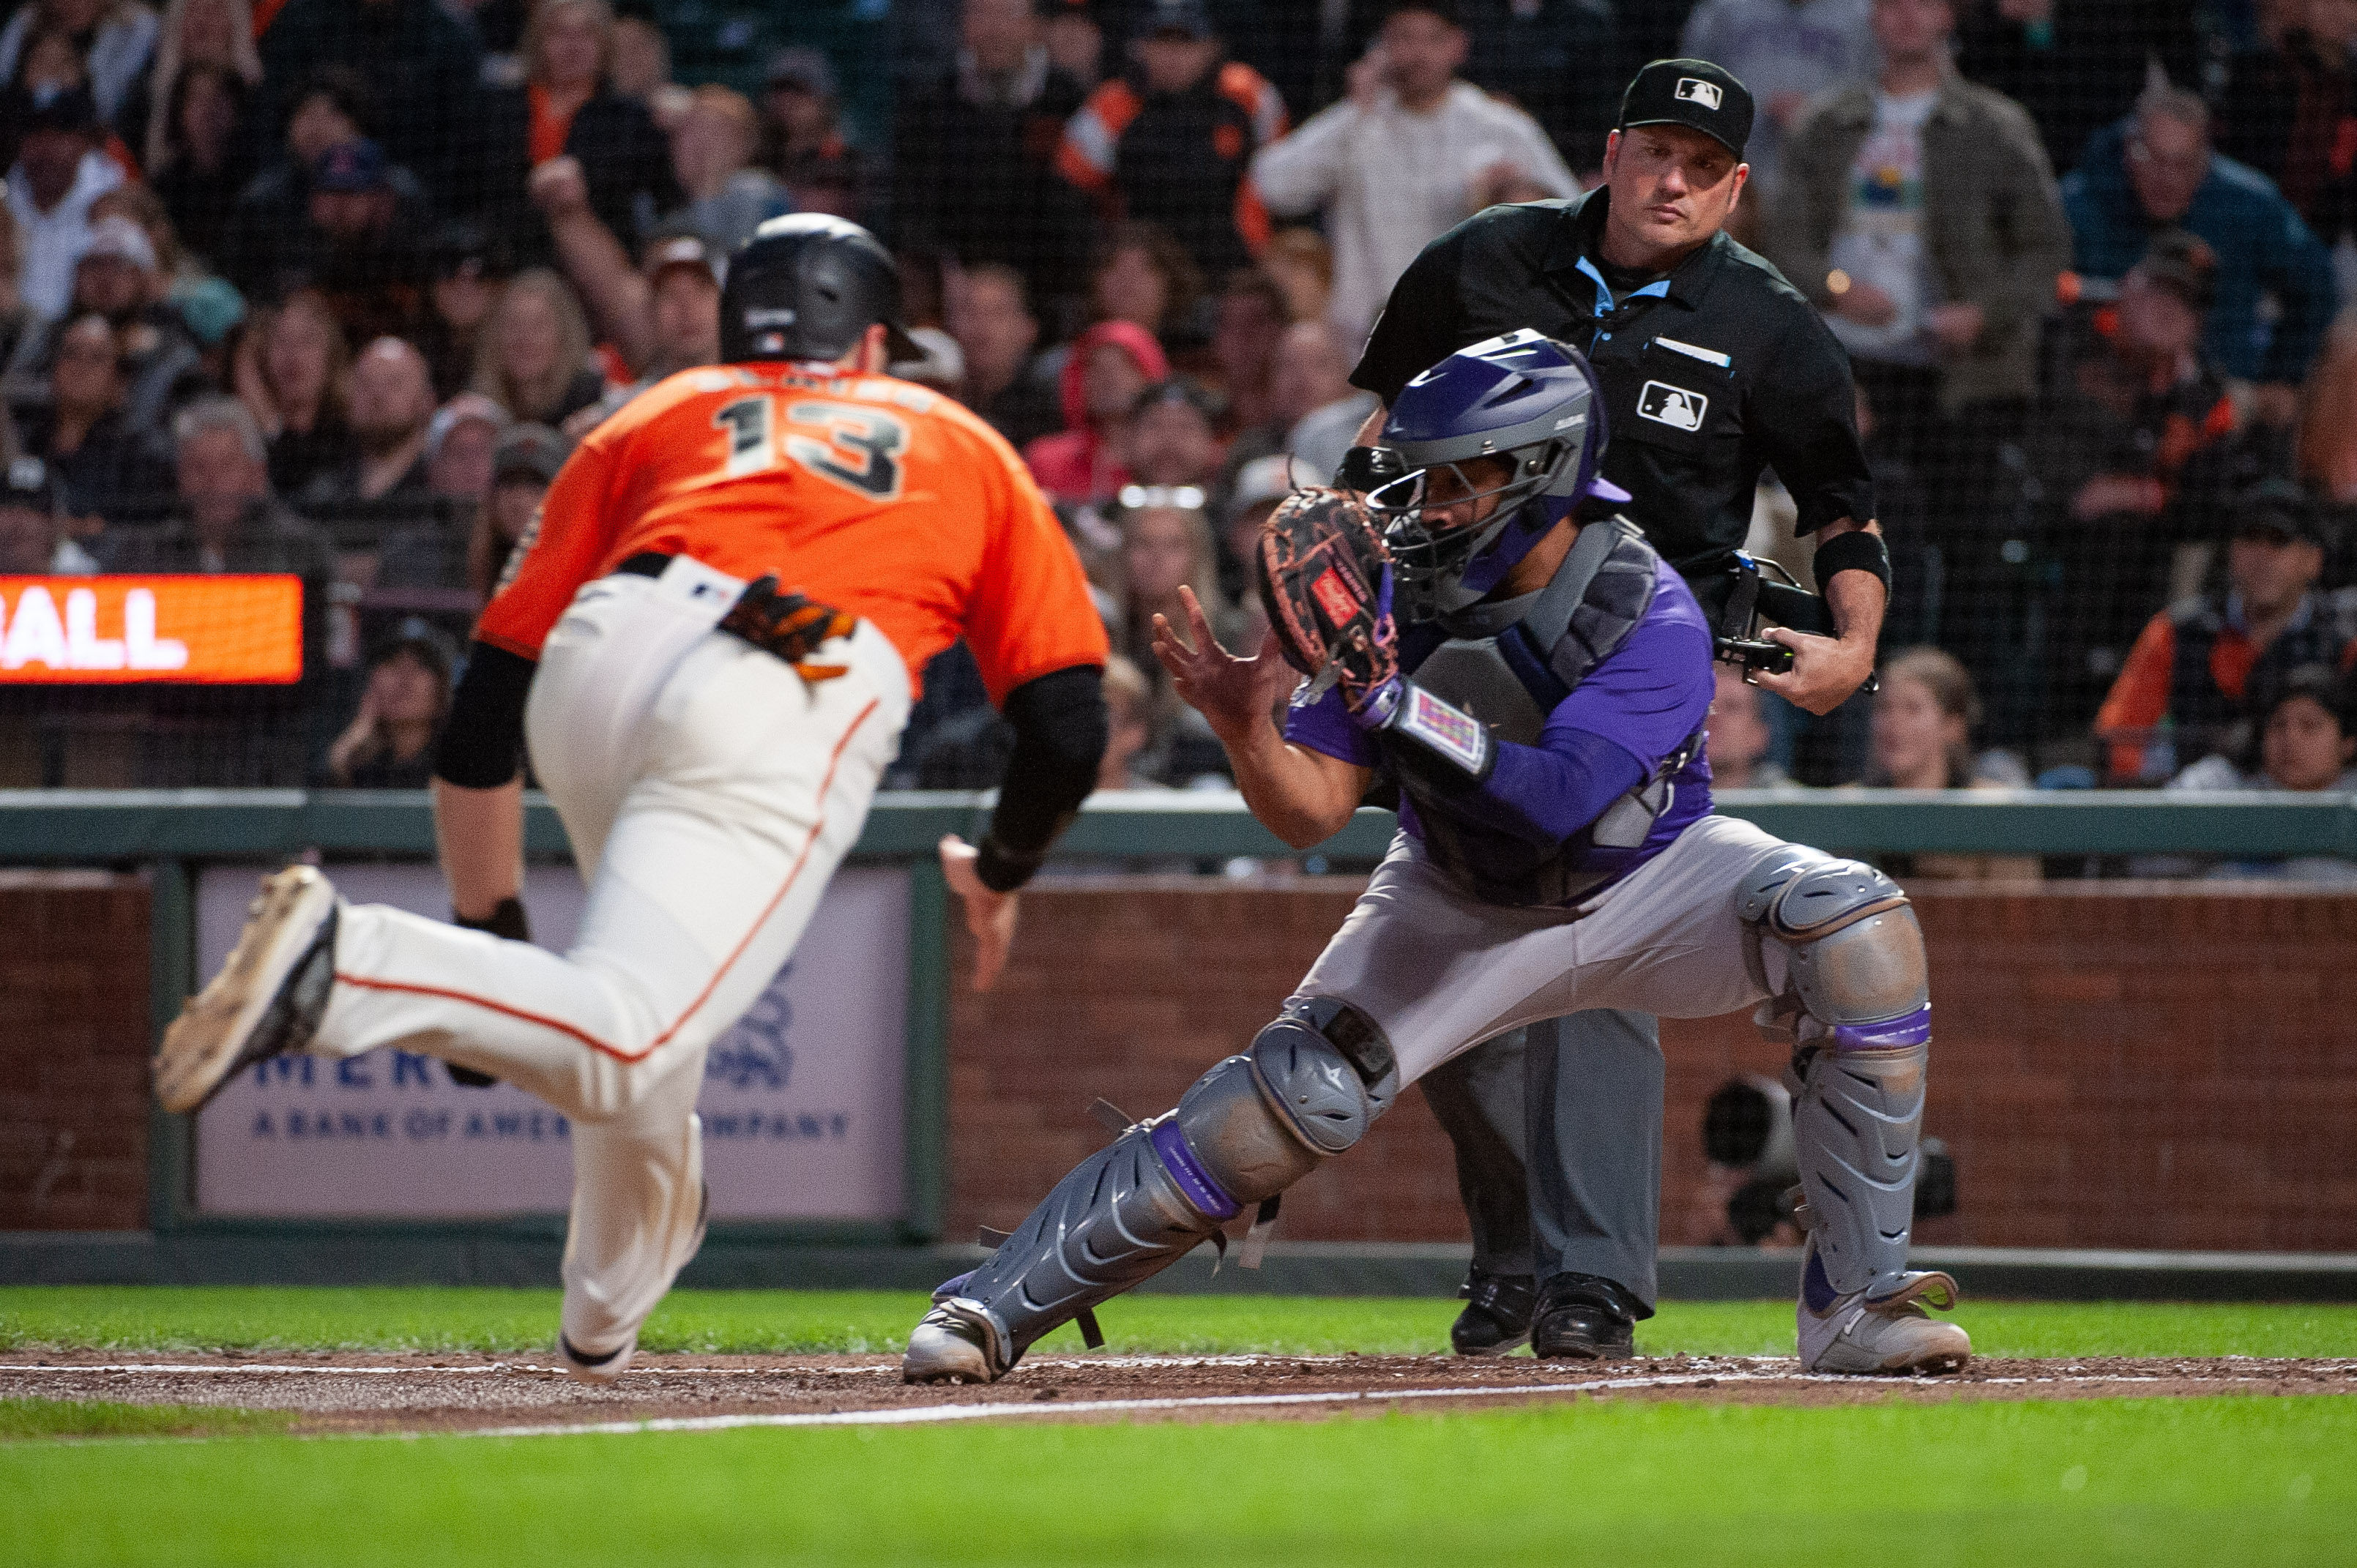 Colorado Rockies Will Host All-Star Game MLB Pulled From Atlanta